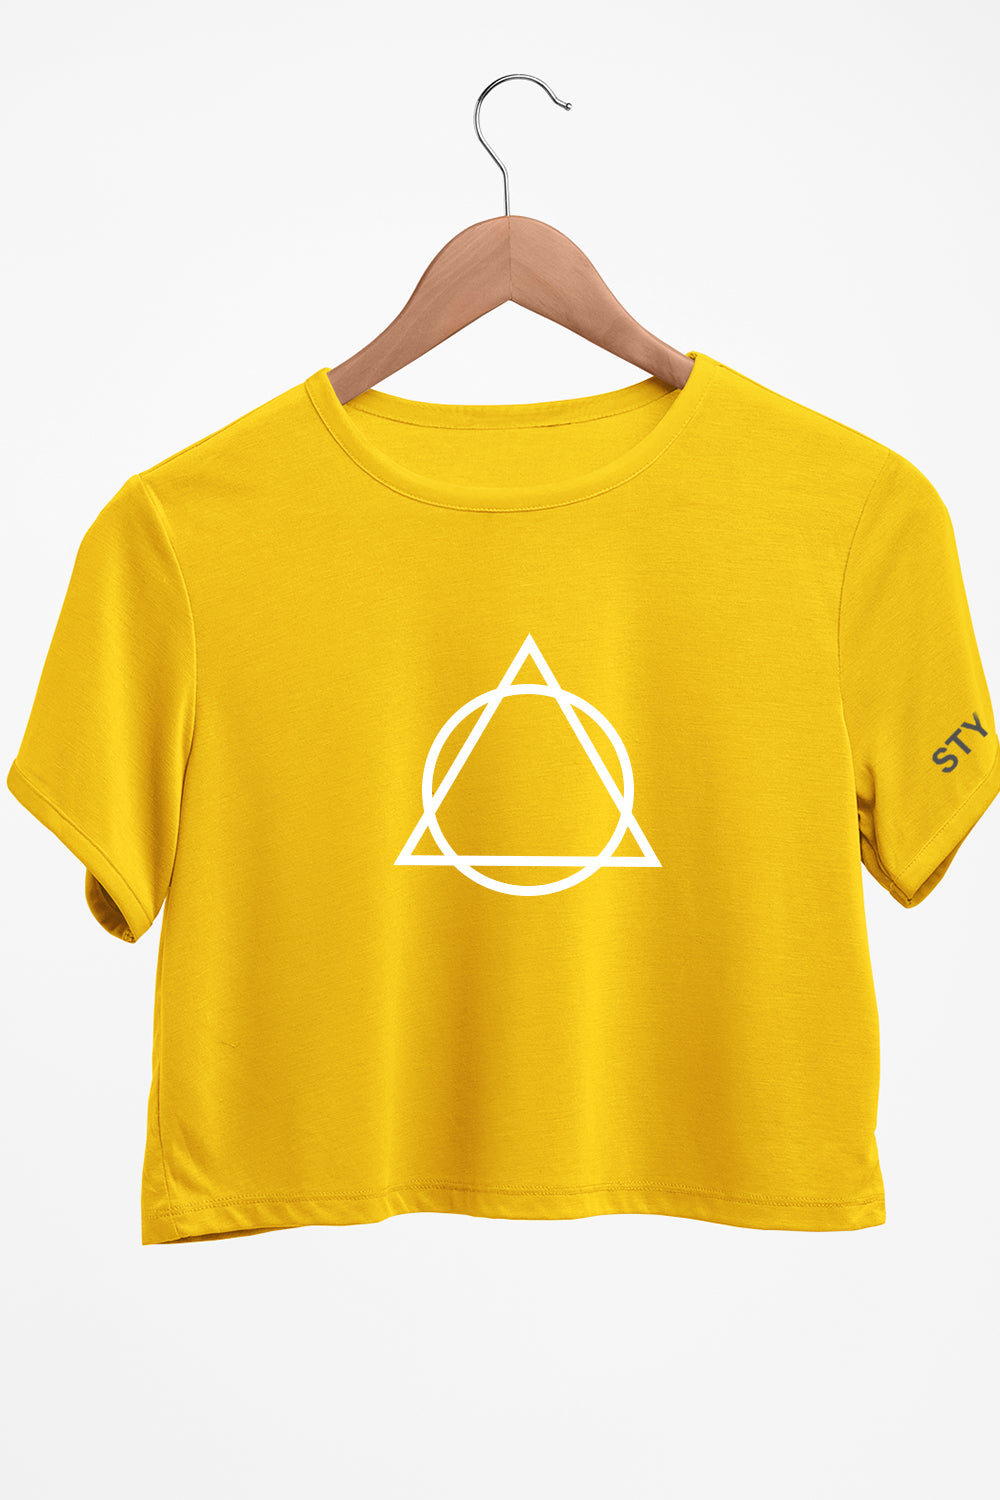 Abstract Graphic Printed Yellow Crop Top